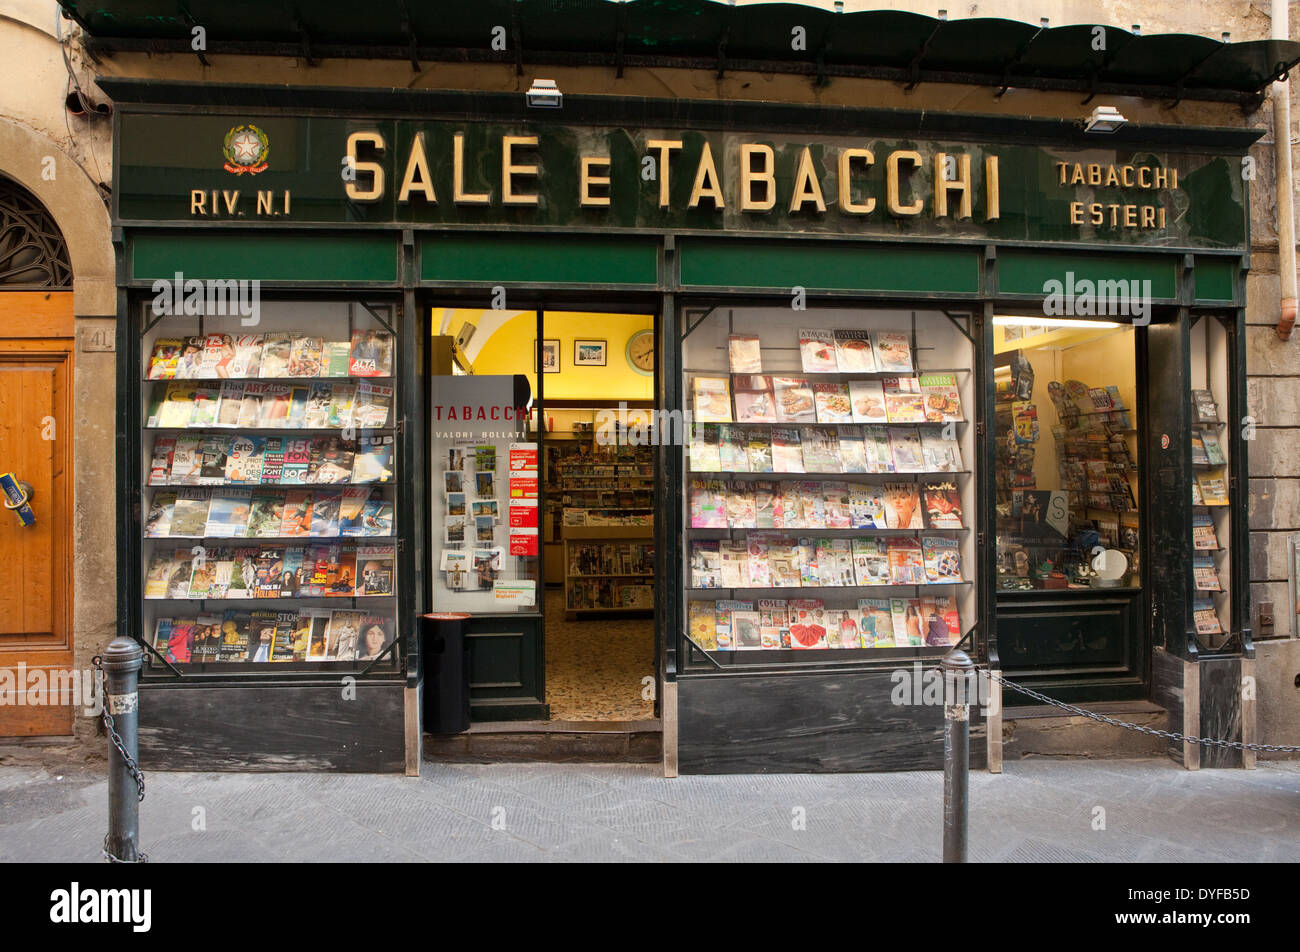 The exterior of a Tabacchi shop in Arezzo, Italy. These shops are the Italian 7-11's and sell a variety of goods alongside tobacco. Stock Photo